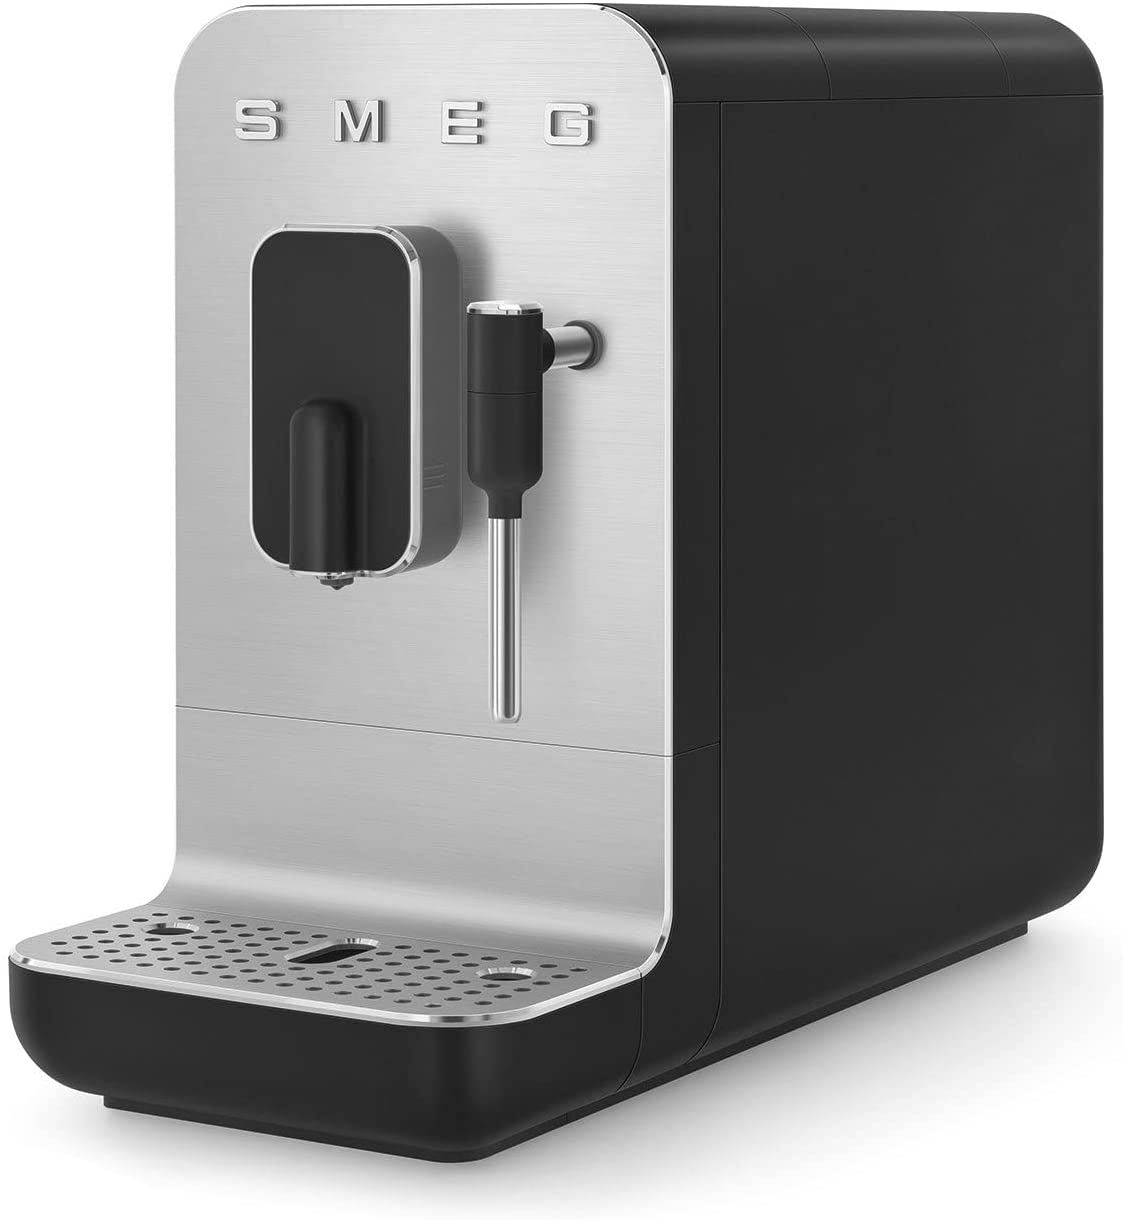 Smeg BCC02BLMEU Compact Fully Automatic Coffee Machine with Steam Function Black